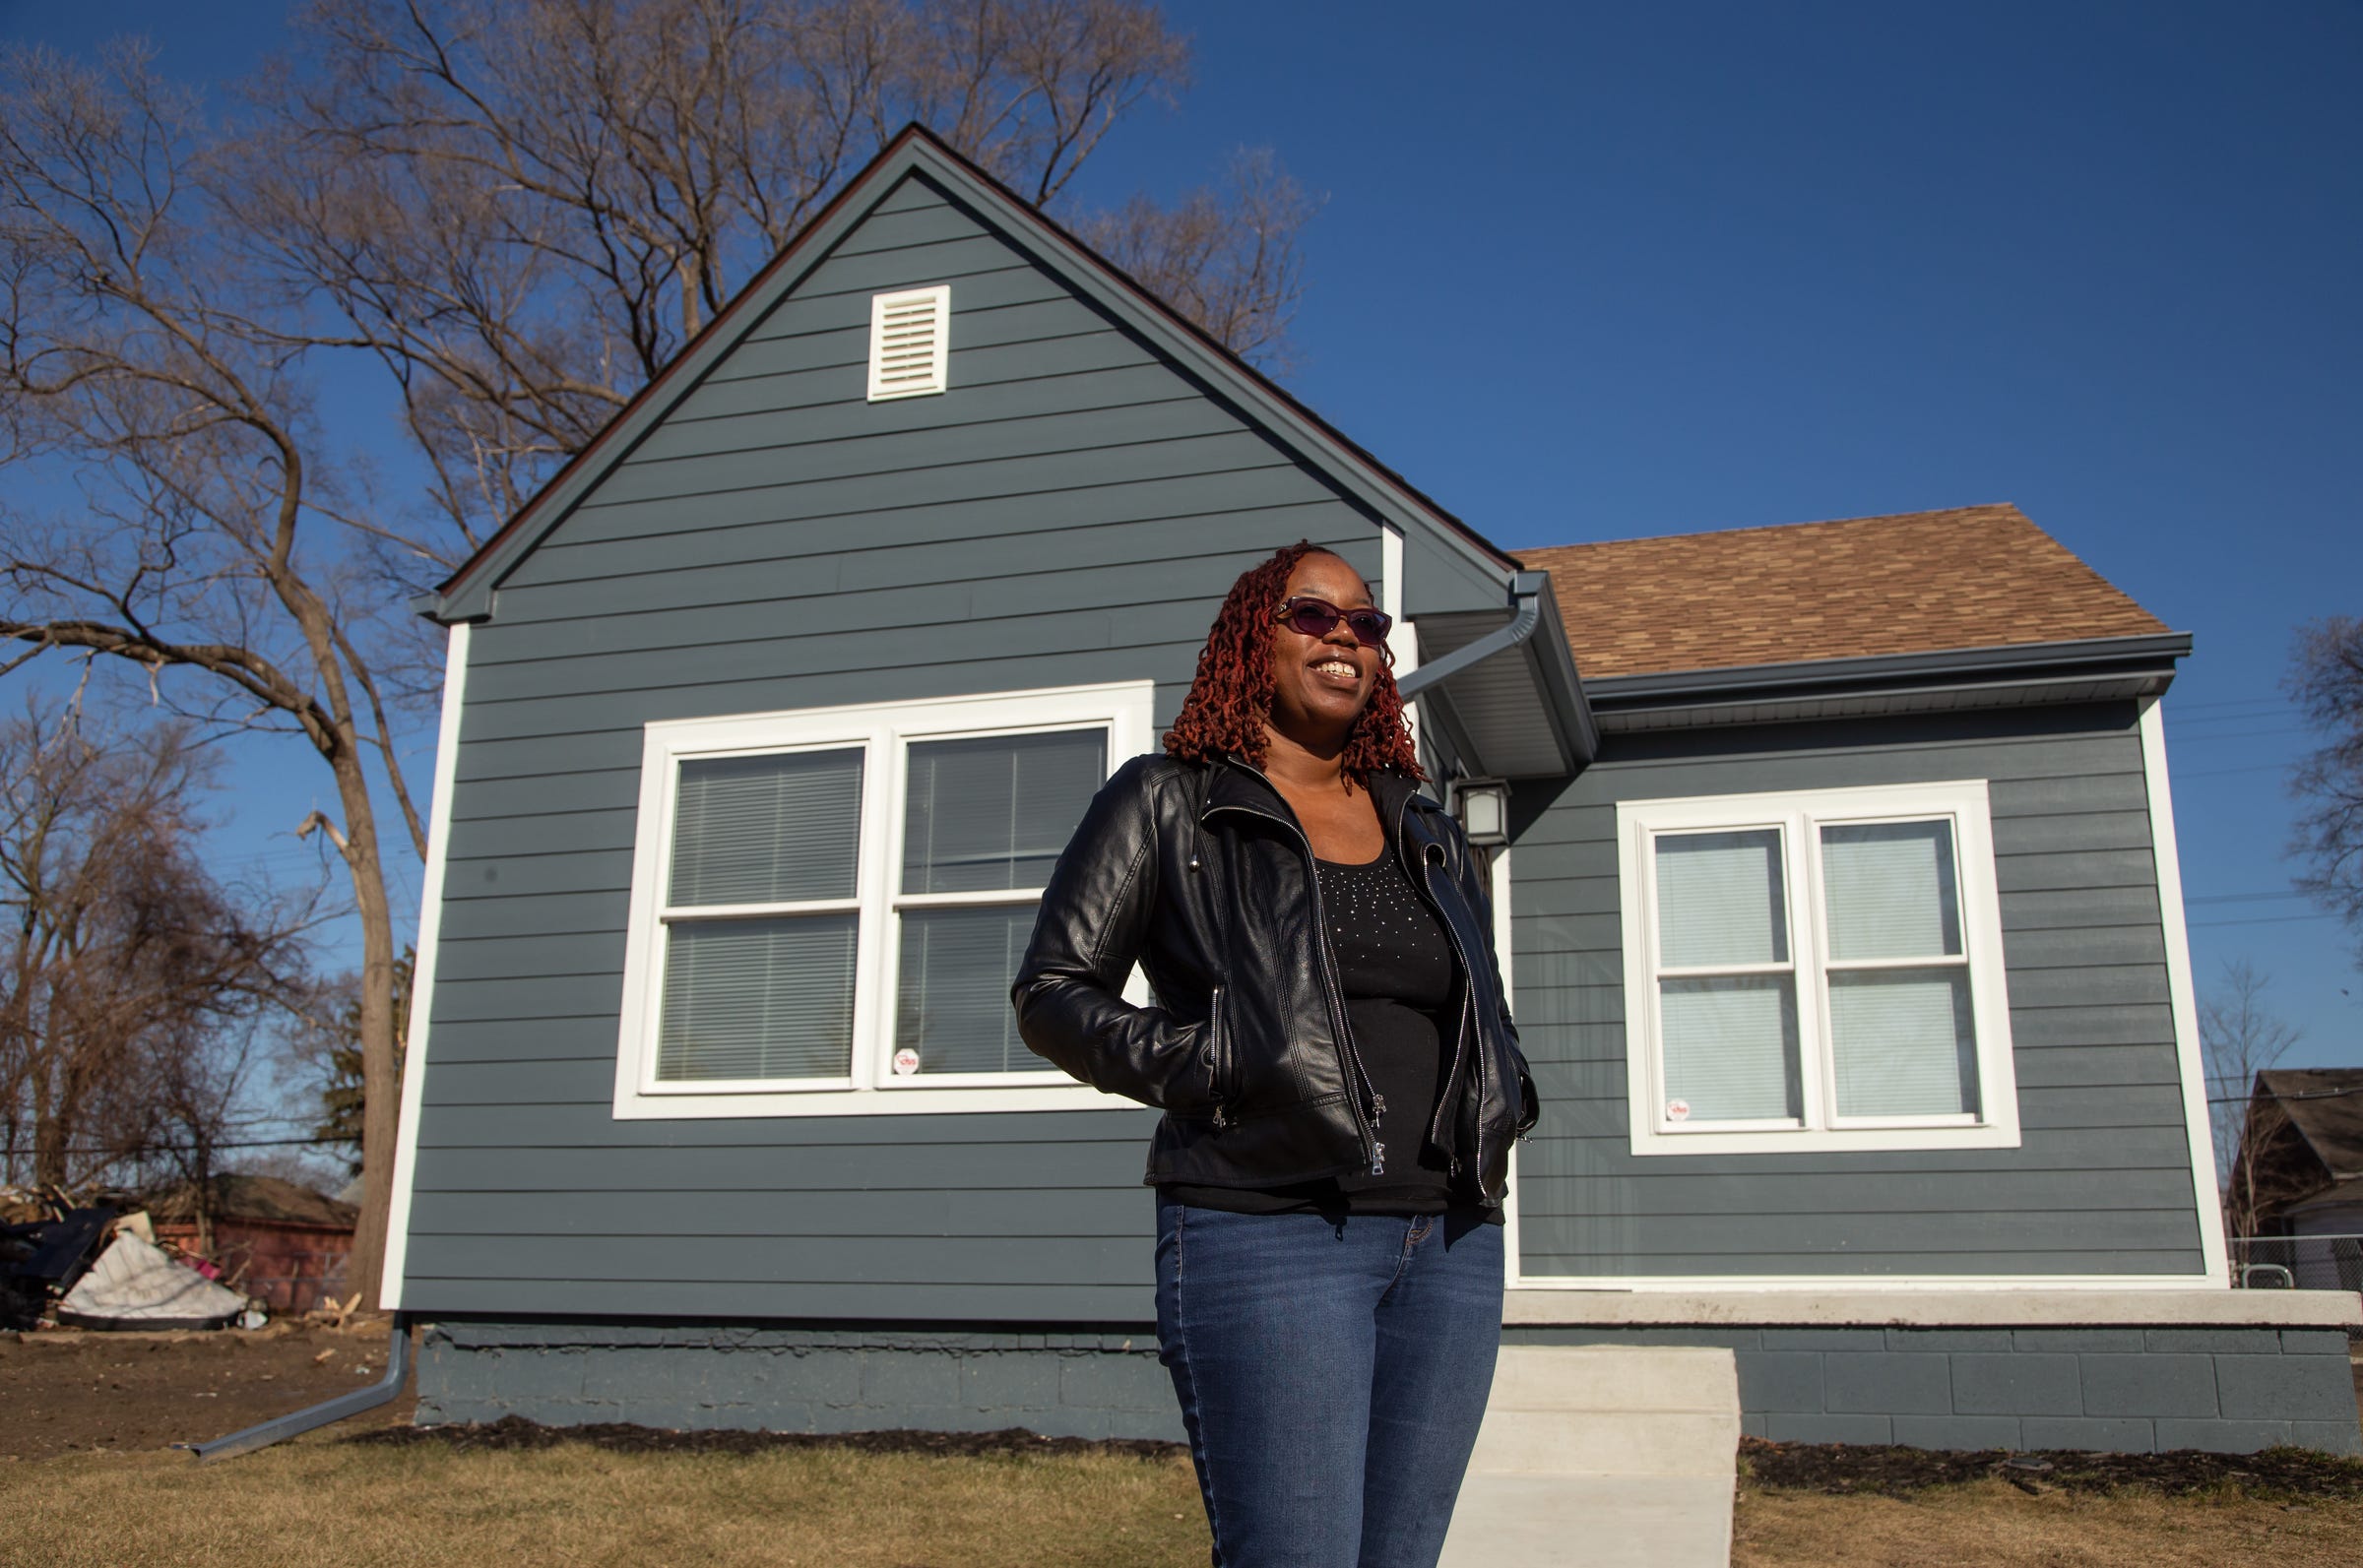 Jomica Miller stands in front of her house she recently purchased on Detroit's northwest side on Tuesday, March 12, 2019.